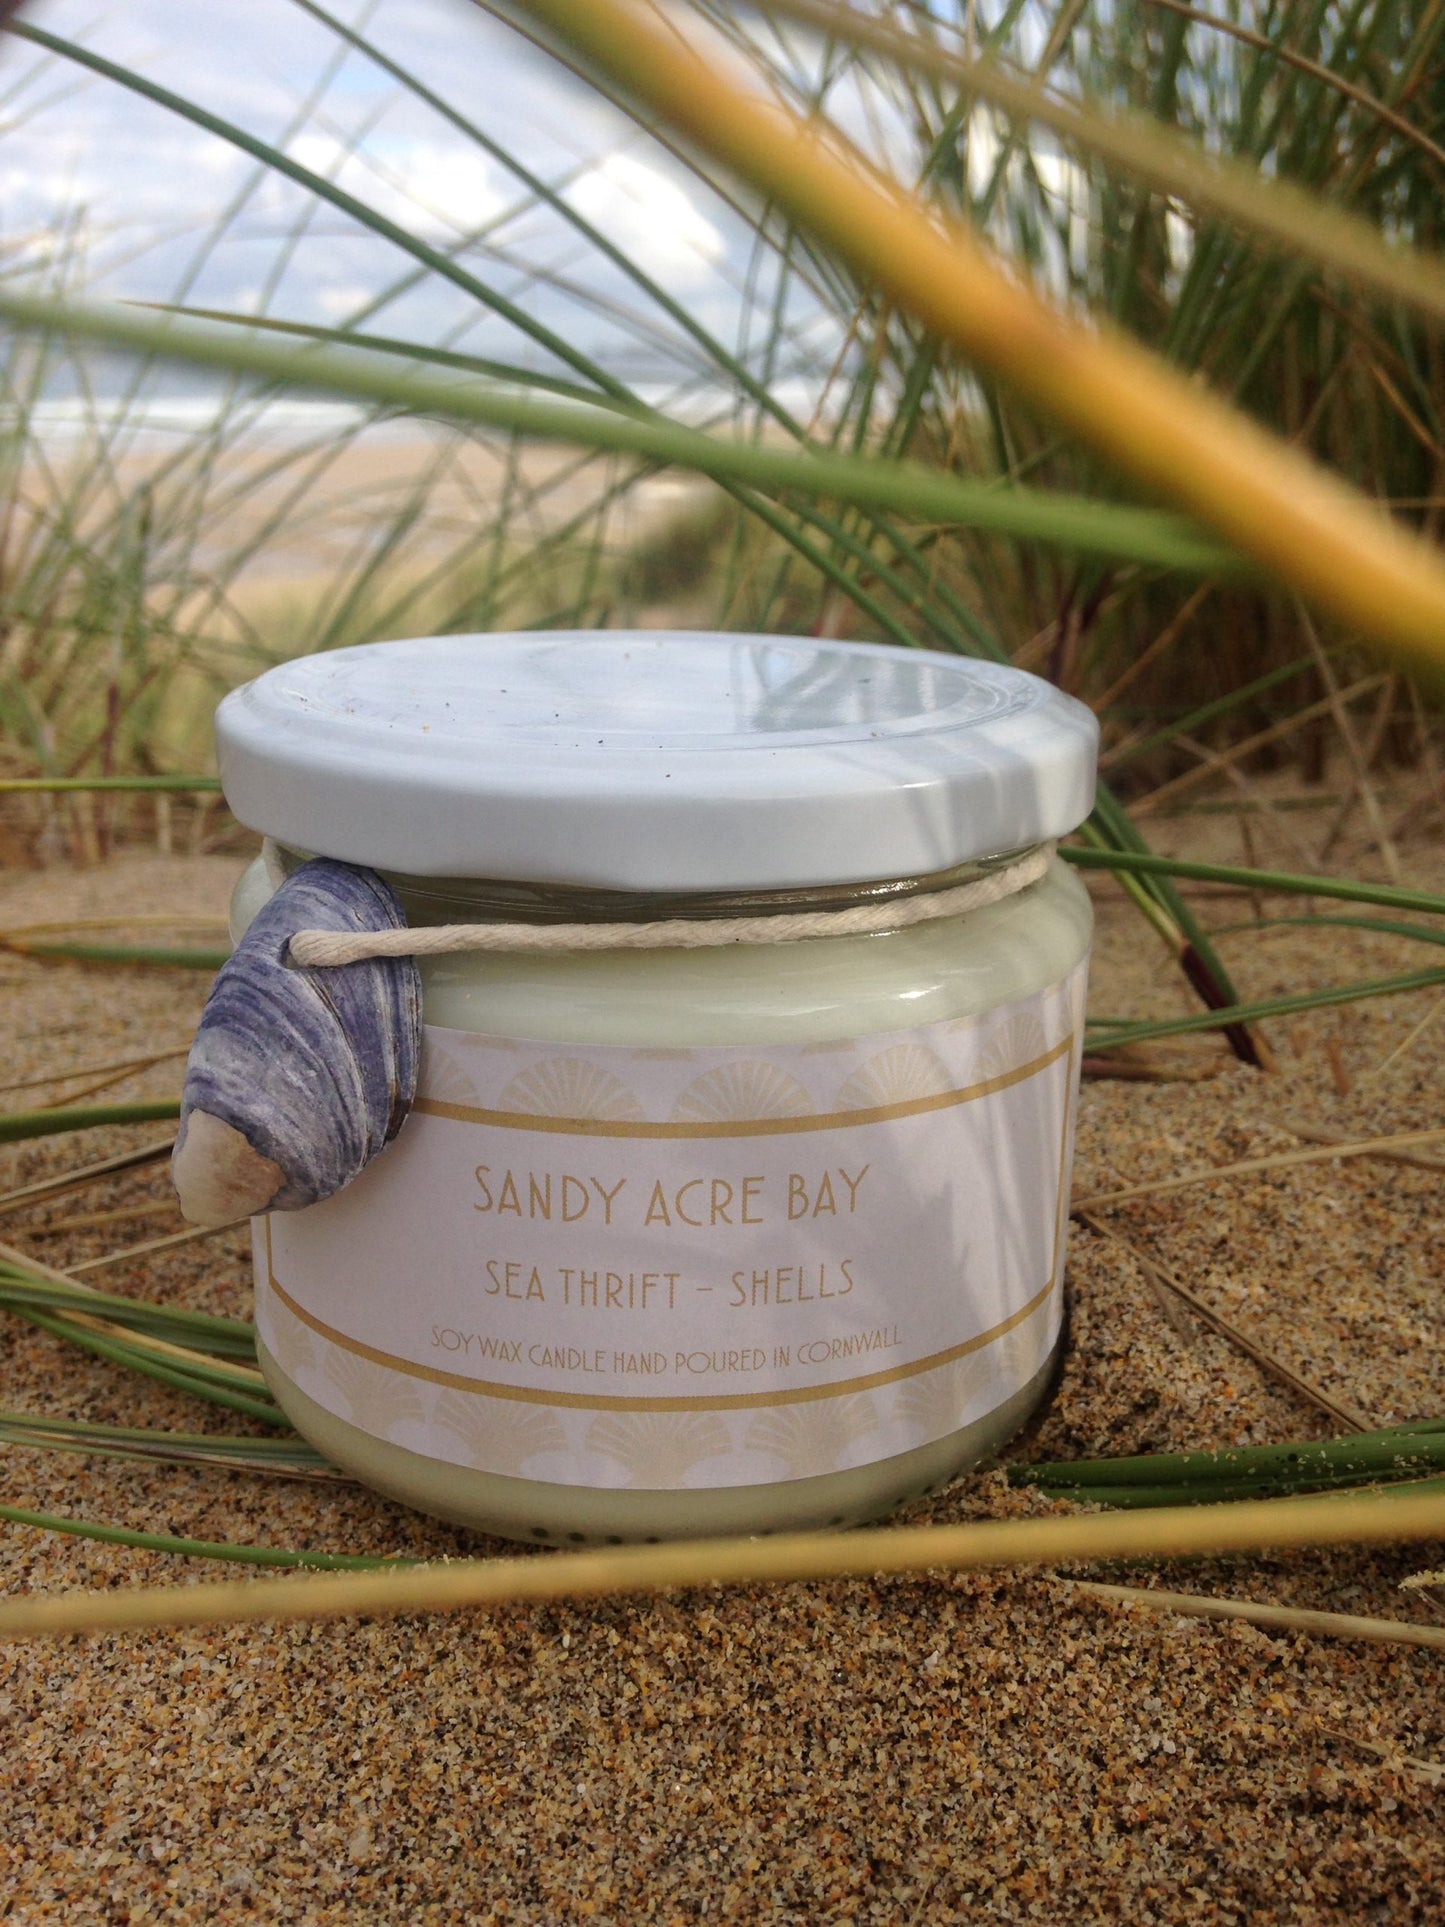 Sandy Acre Bay Candle  £20  Sea Thrift – Shells  Cool sea air and salty pebbles mingle with the delicate floral's of dune grass and sea thrift  Ingredients: natural plant wax, fragrance oils  Shell may vary to image shown  Double wicked plant wax candle . Burns for approx 40 hours. Made in Cornwall by Seawitch Candles    "Love love love this candle - best candle I have ever bought and I have bought a LOT of candles !!!!" Davina Davies coastal life, coastal living, coastal style